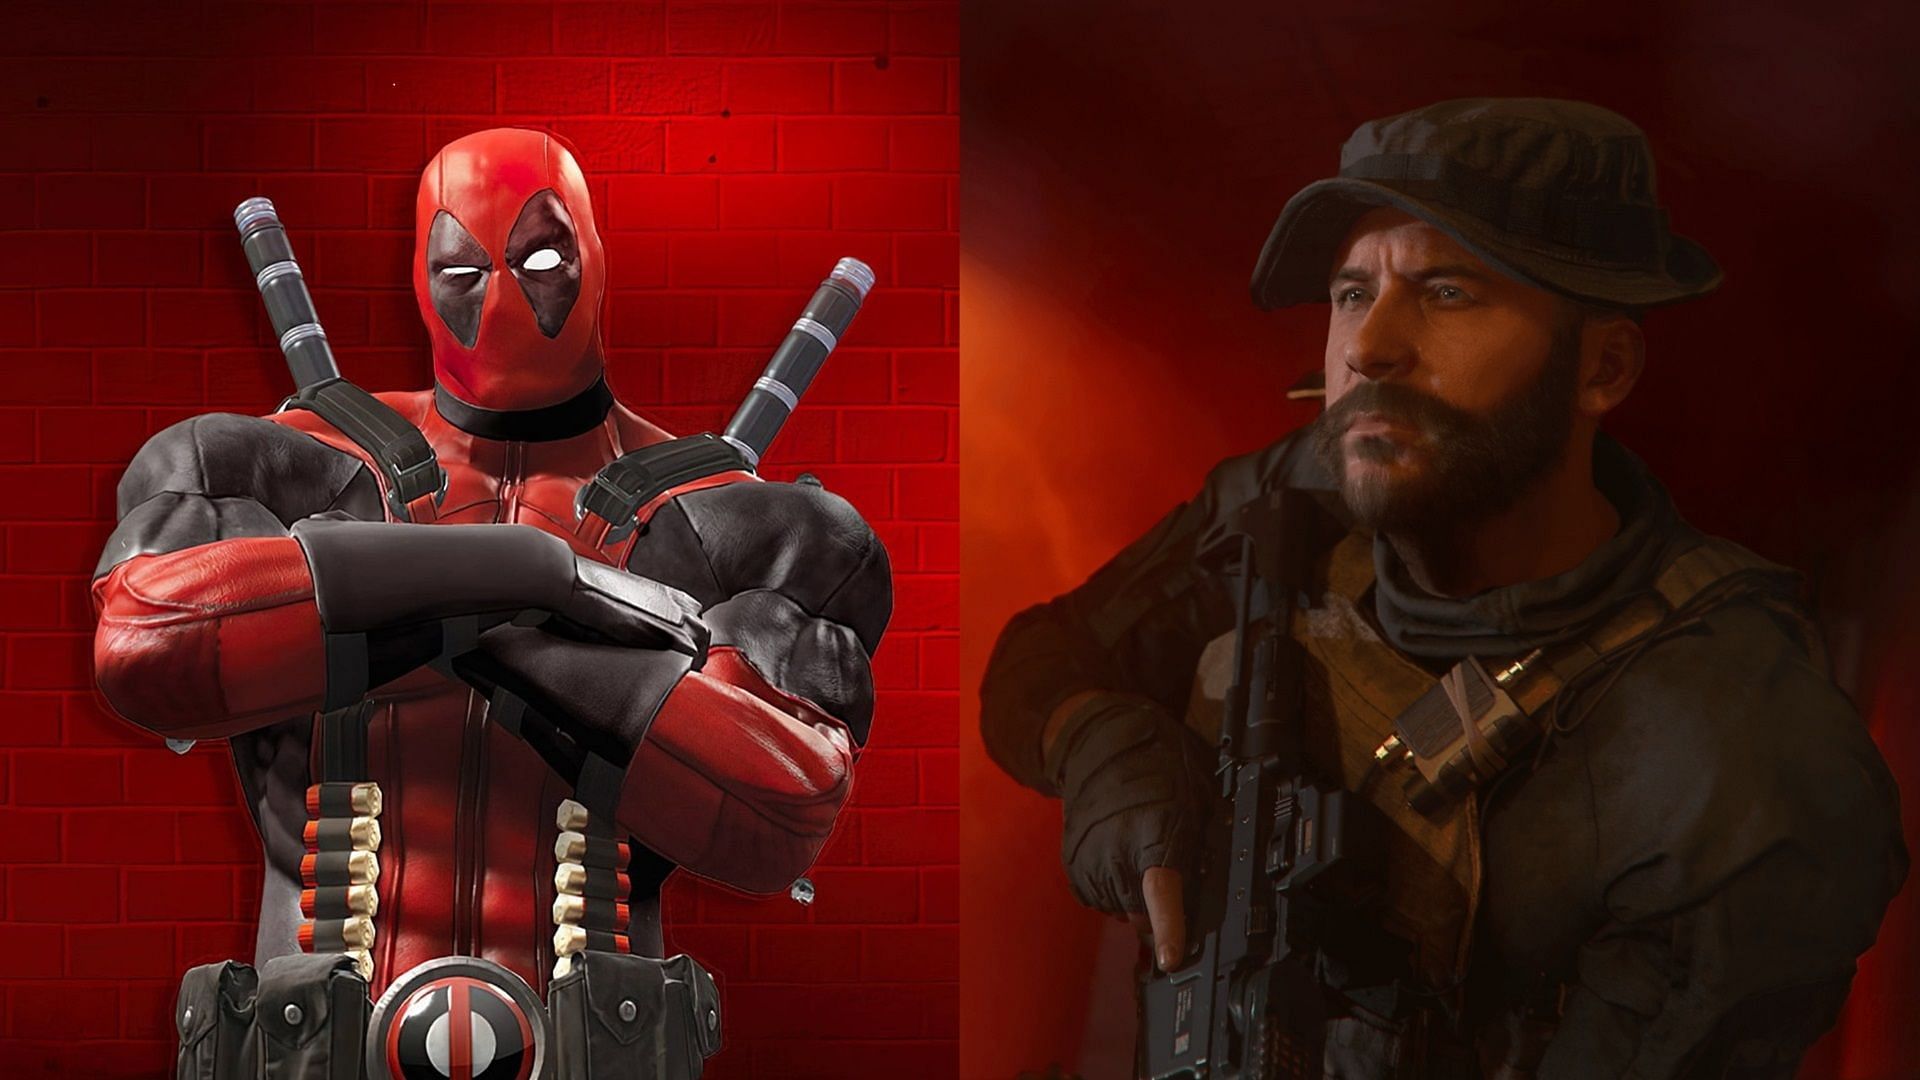 Deadpool on the left and Captain Price from Call of Duty on the right